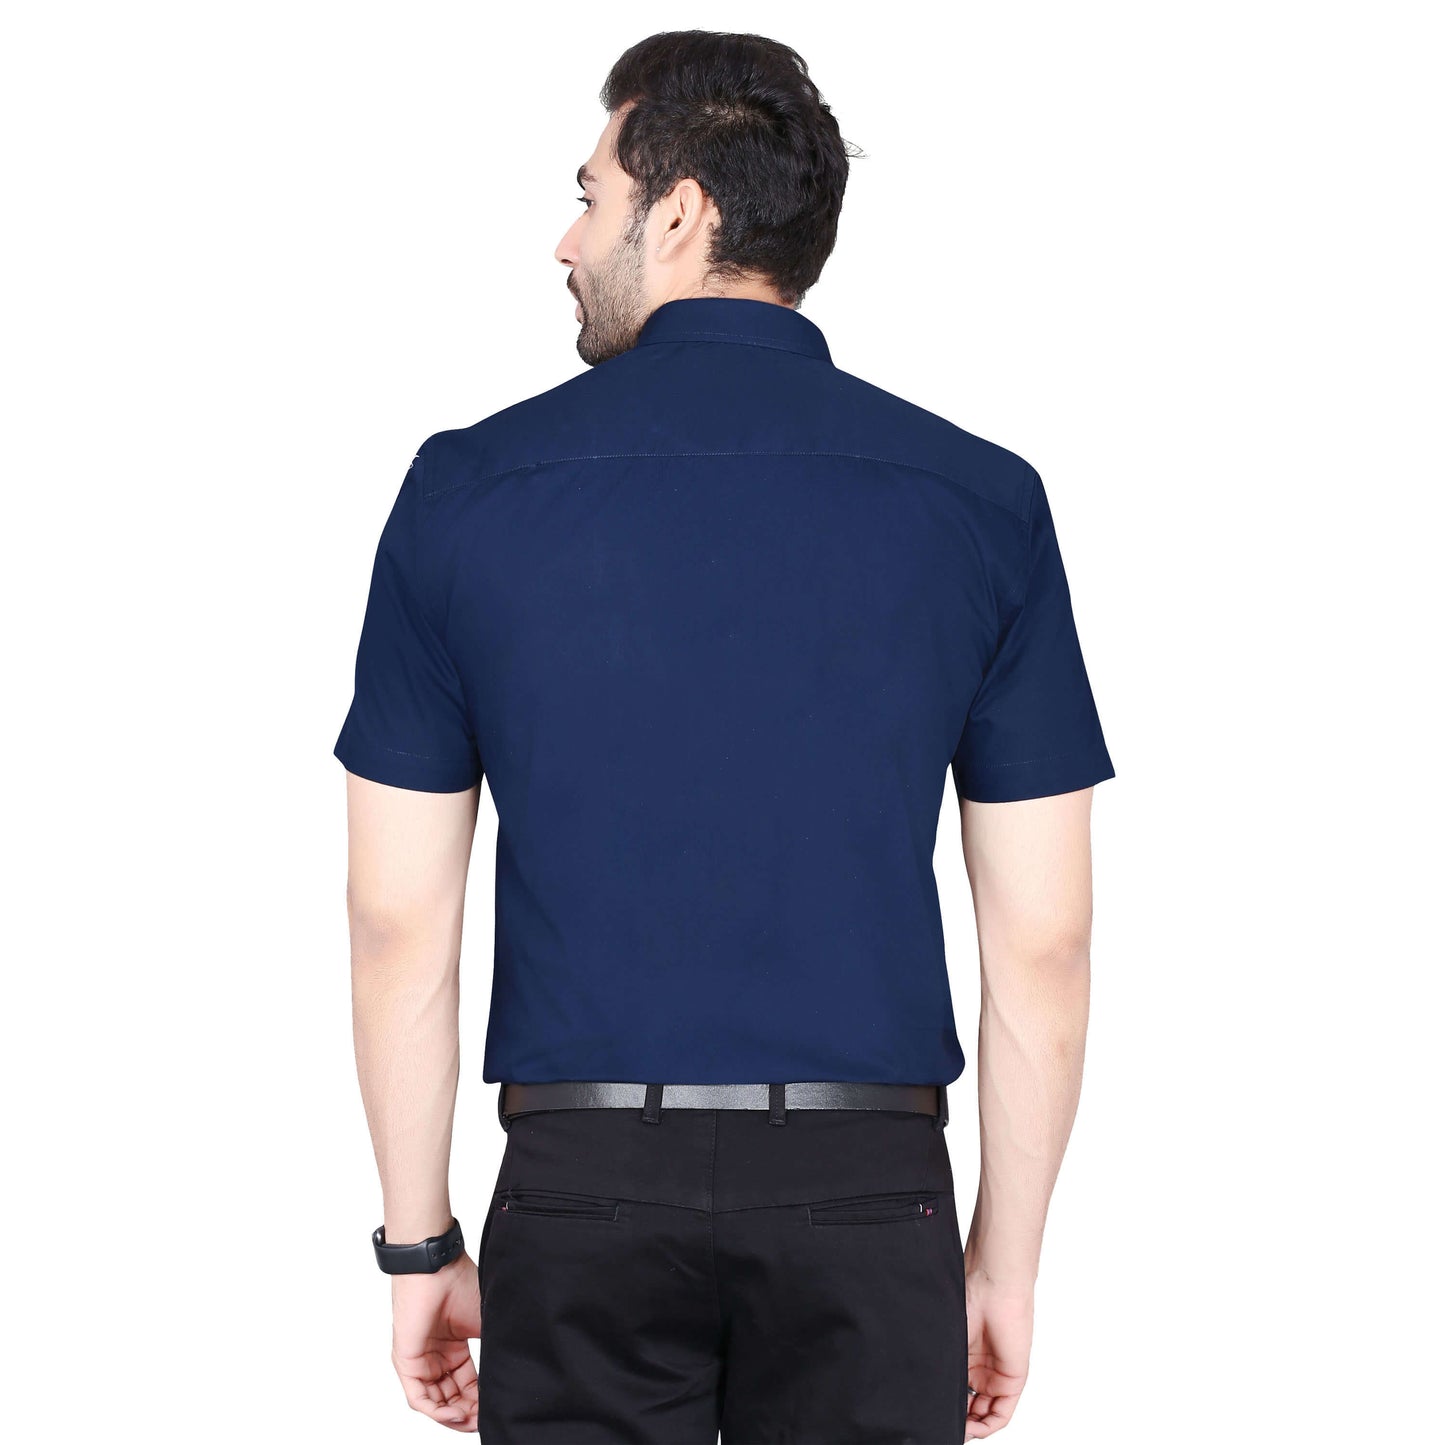 5thanfold Men's Formal Pure Cotton Half Sleeve Solid Light Navy Slim Fit Shirt